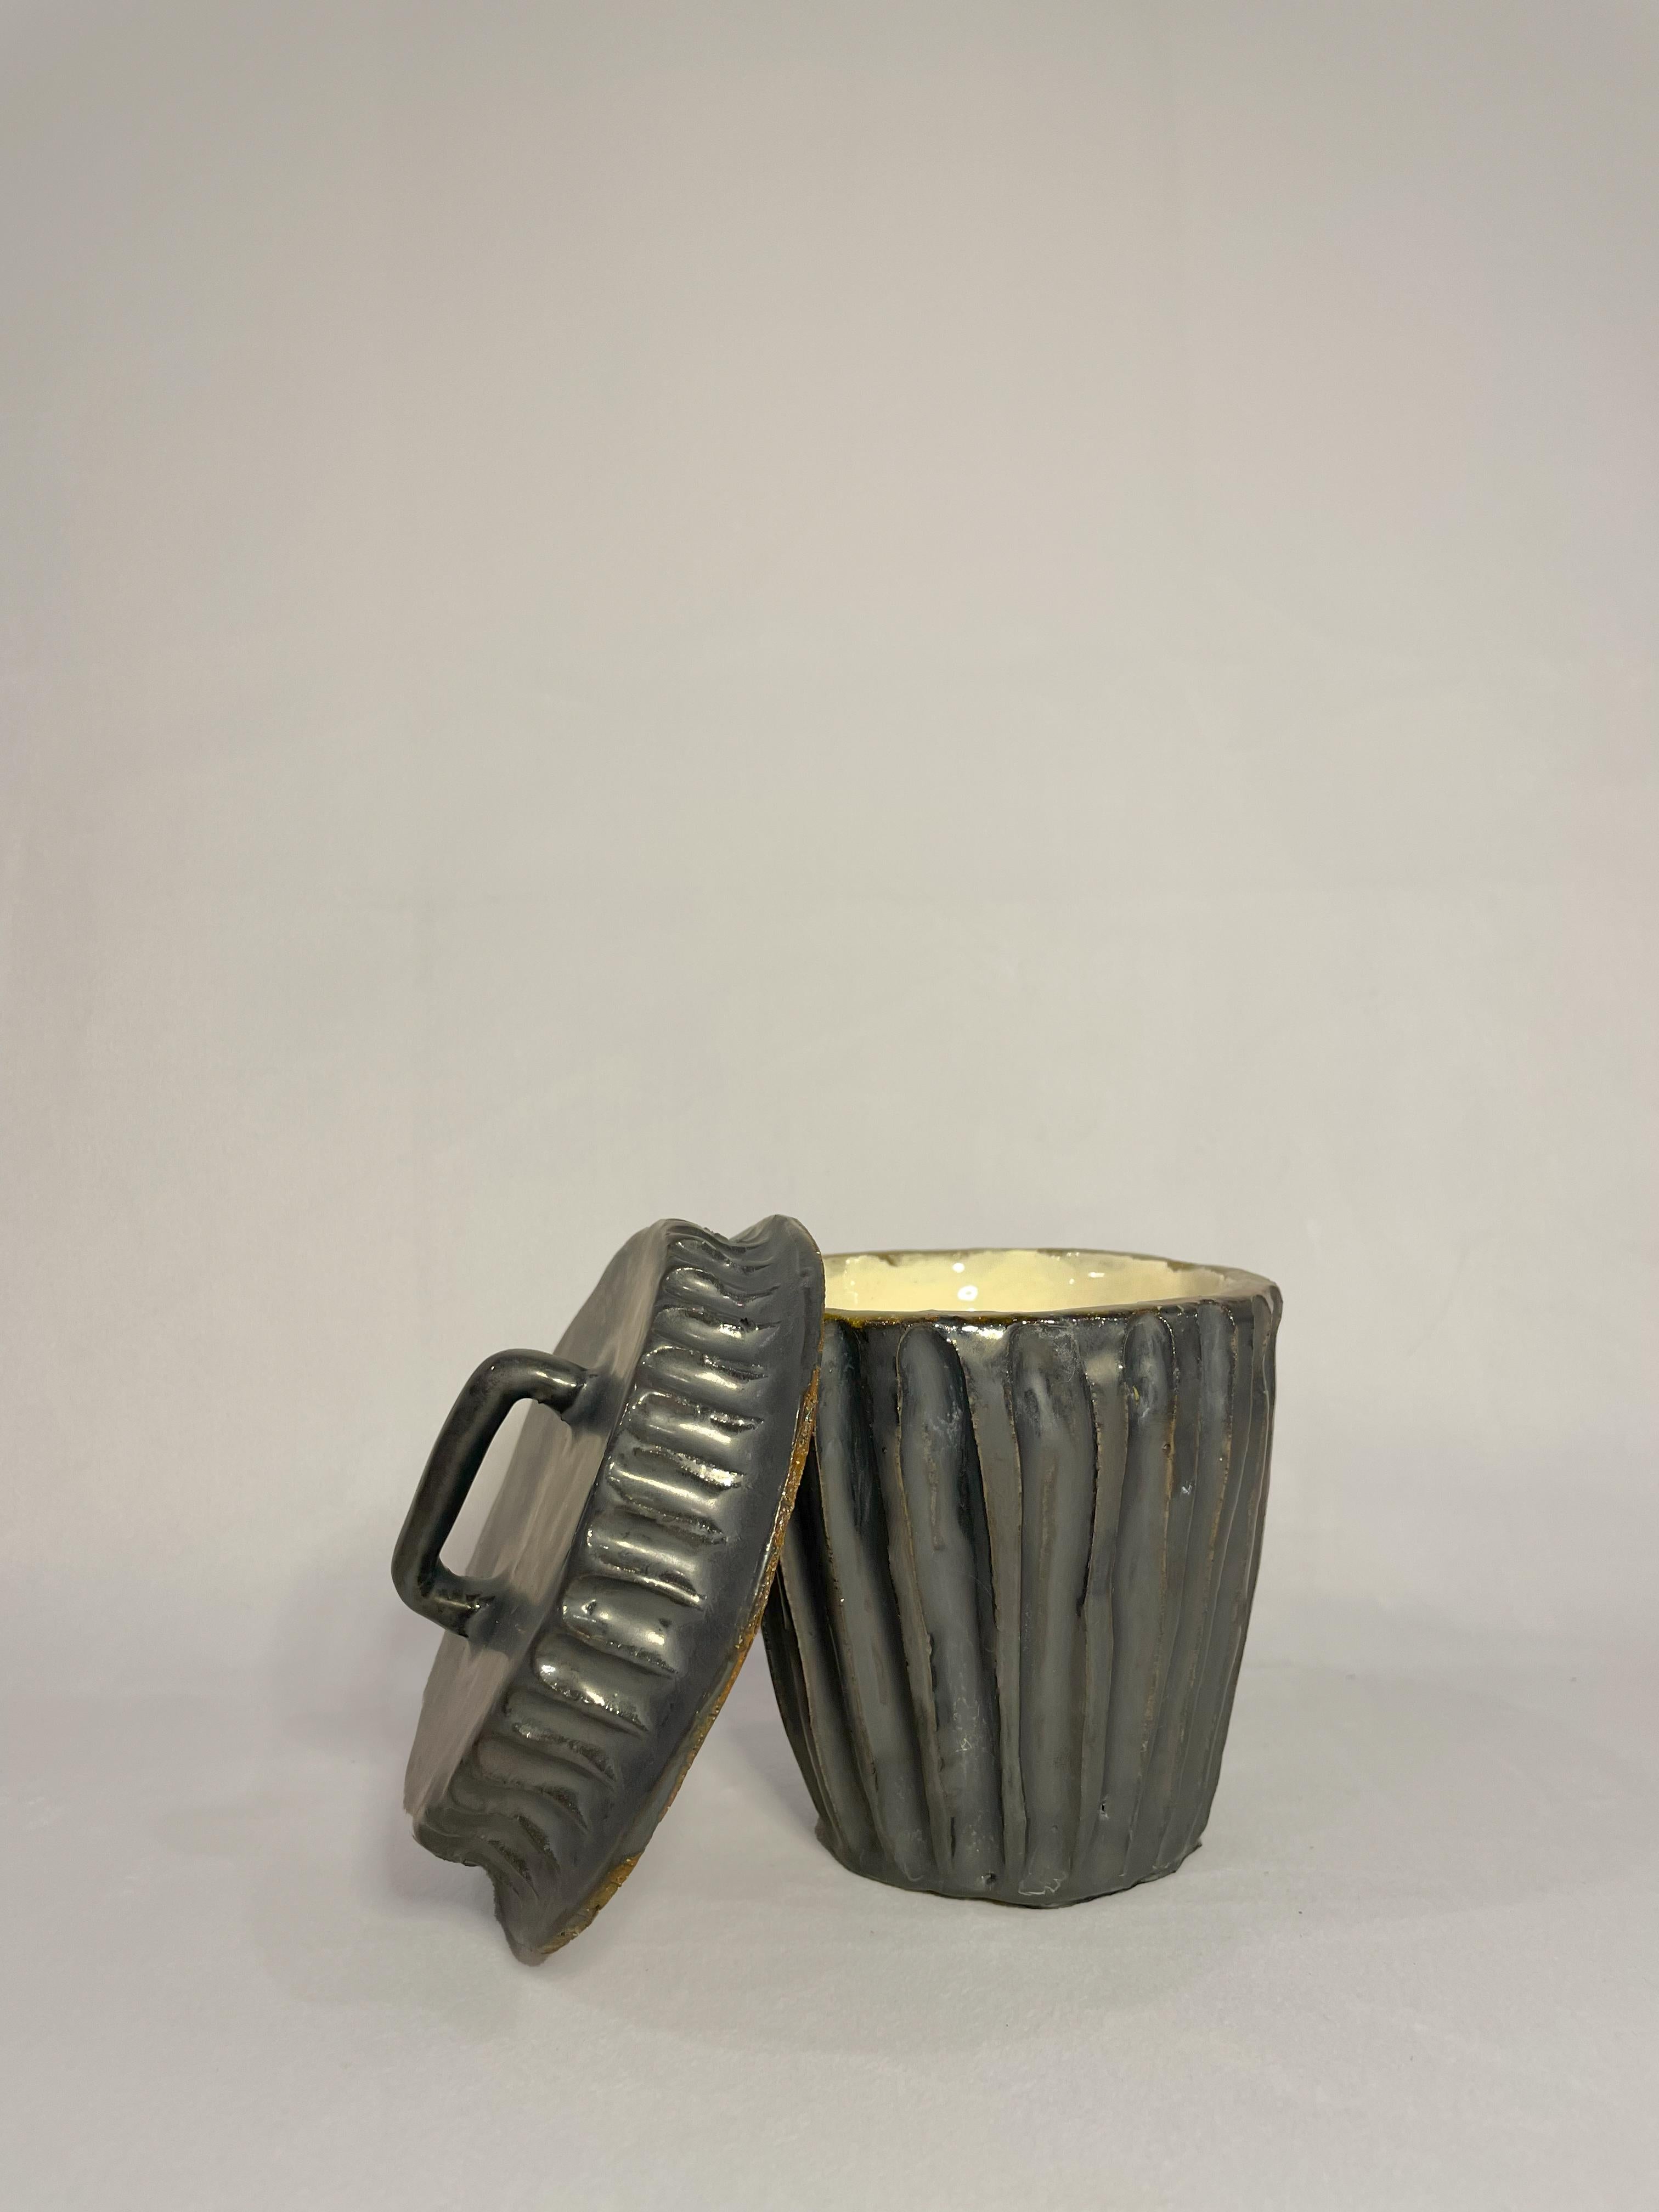 This delightful miniature trash can captures the essence of a traditional metal trash can with a touch of artistic flair. This small vessel exudes character and whimsy, making it an endearing addition to any space. 

A metallic glaze mimics the